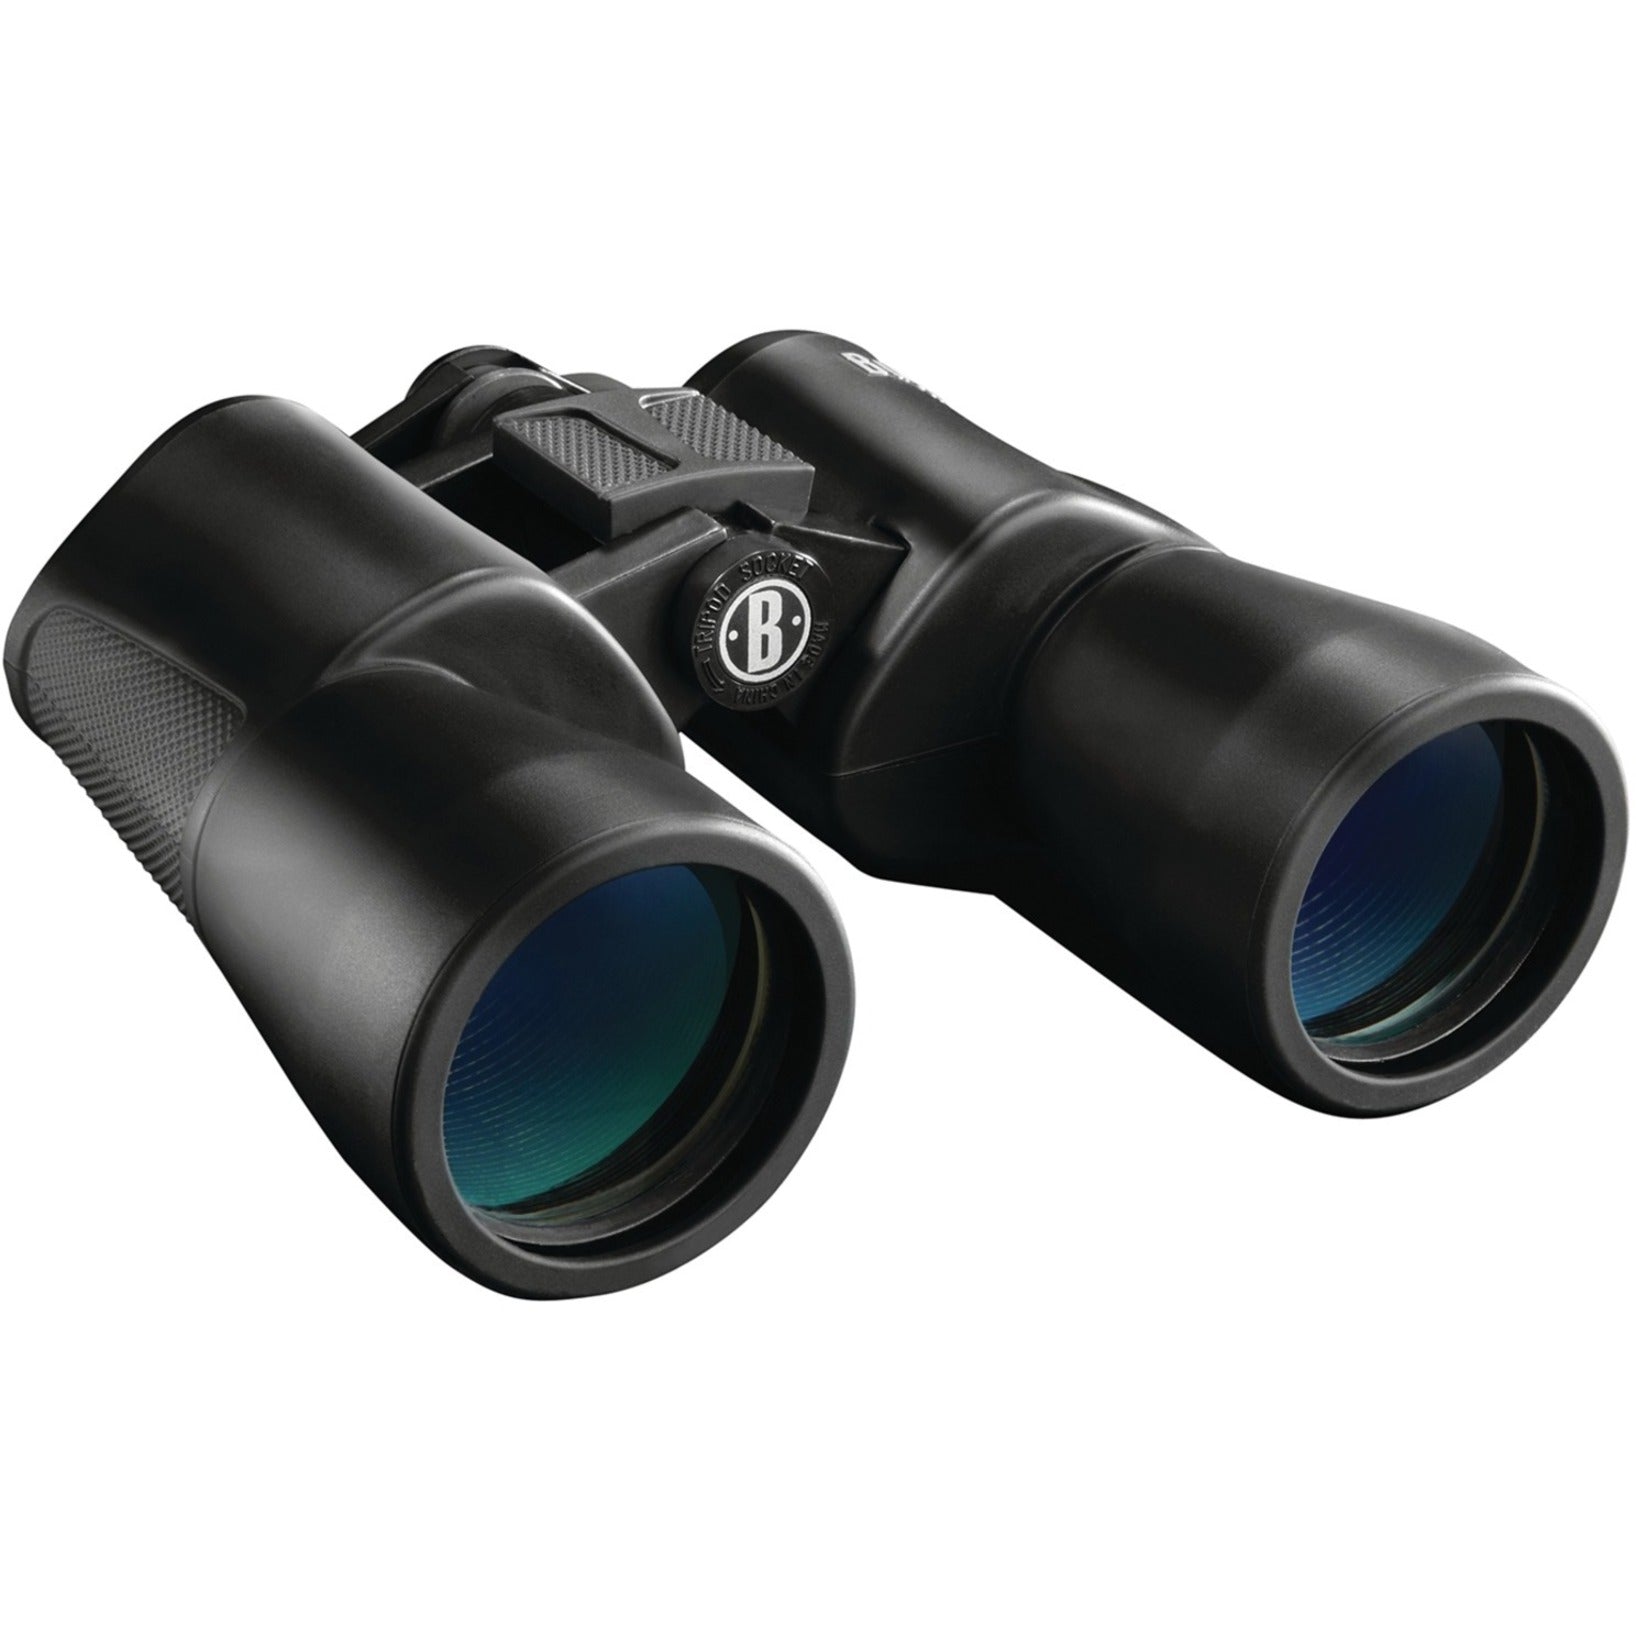 Bushnell 13-2050 Powerview 20x 50mm Binocular, Multi-coated, Armored, Ideal for Nature, Concert, and Travel